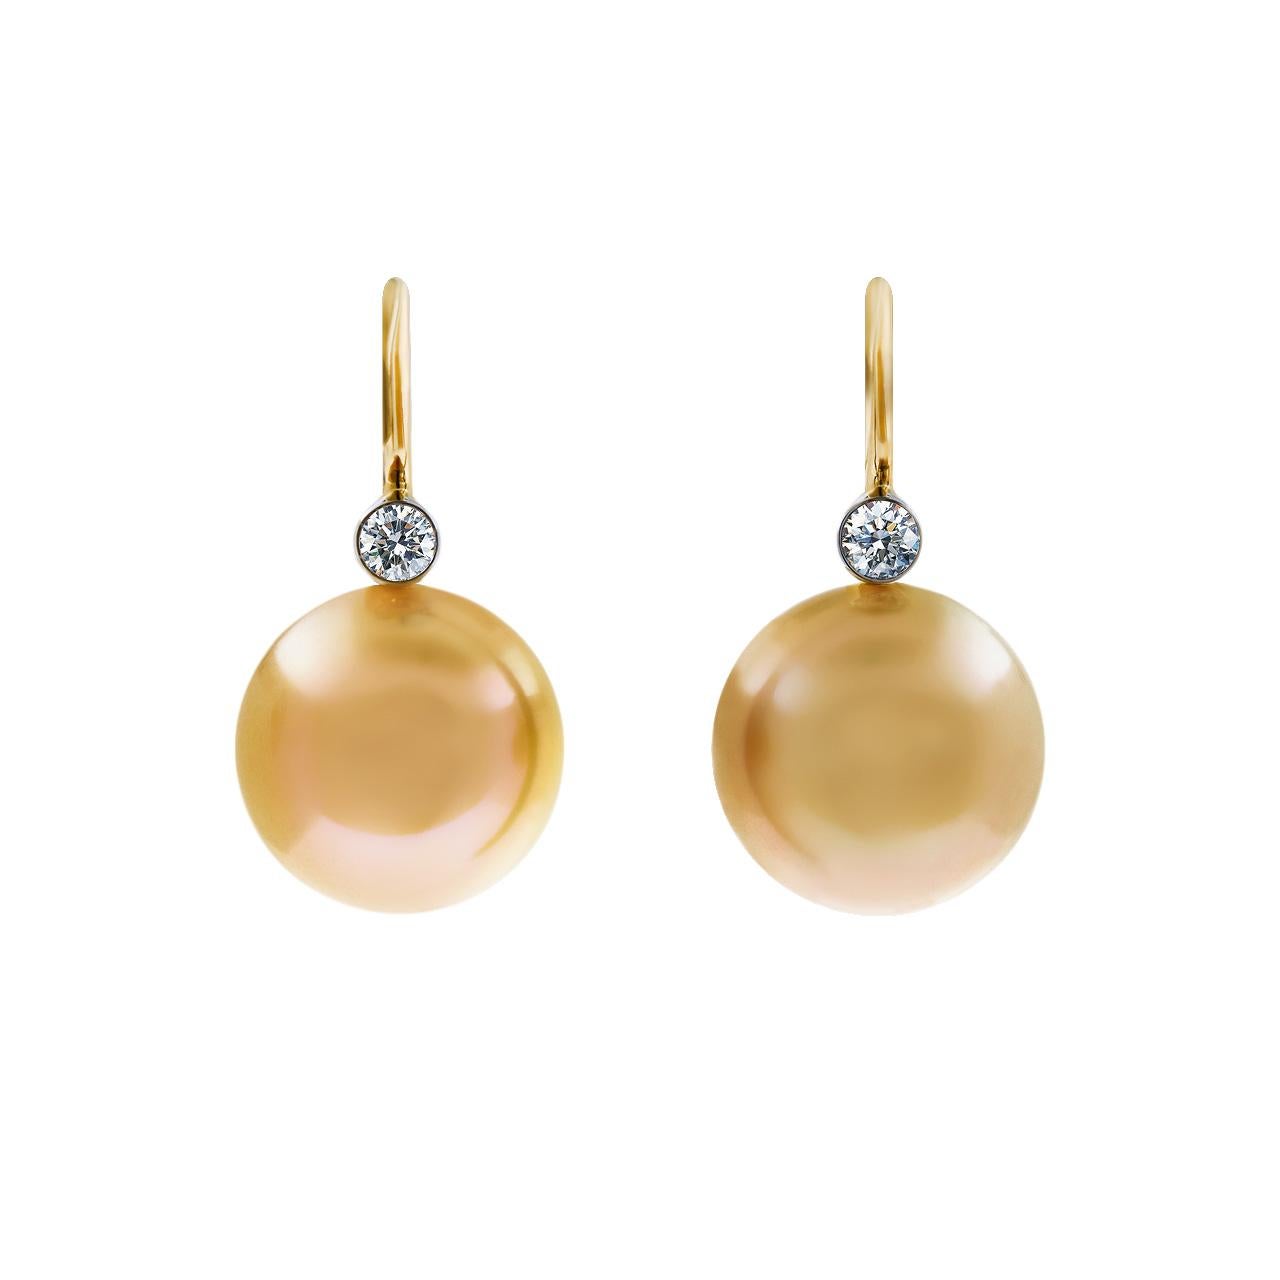 - 2 Round Diamonds – 0.16 ct, G/VVS1-VVS2
- 12.5 mm Golden South Sea Pearls
- 18K Yellow Gold 
- Weight: 7.80 g
Two perfectly matched lustrous Golden South Sea Pearls measuring 12.5 millimeters. Elevating the impact of the piece are 2 diamonds on